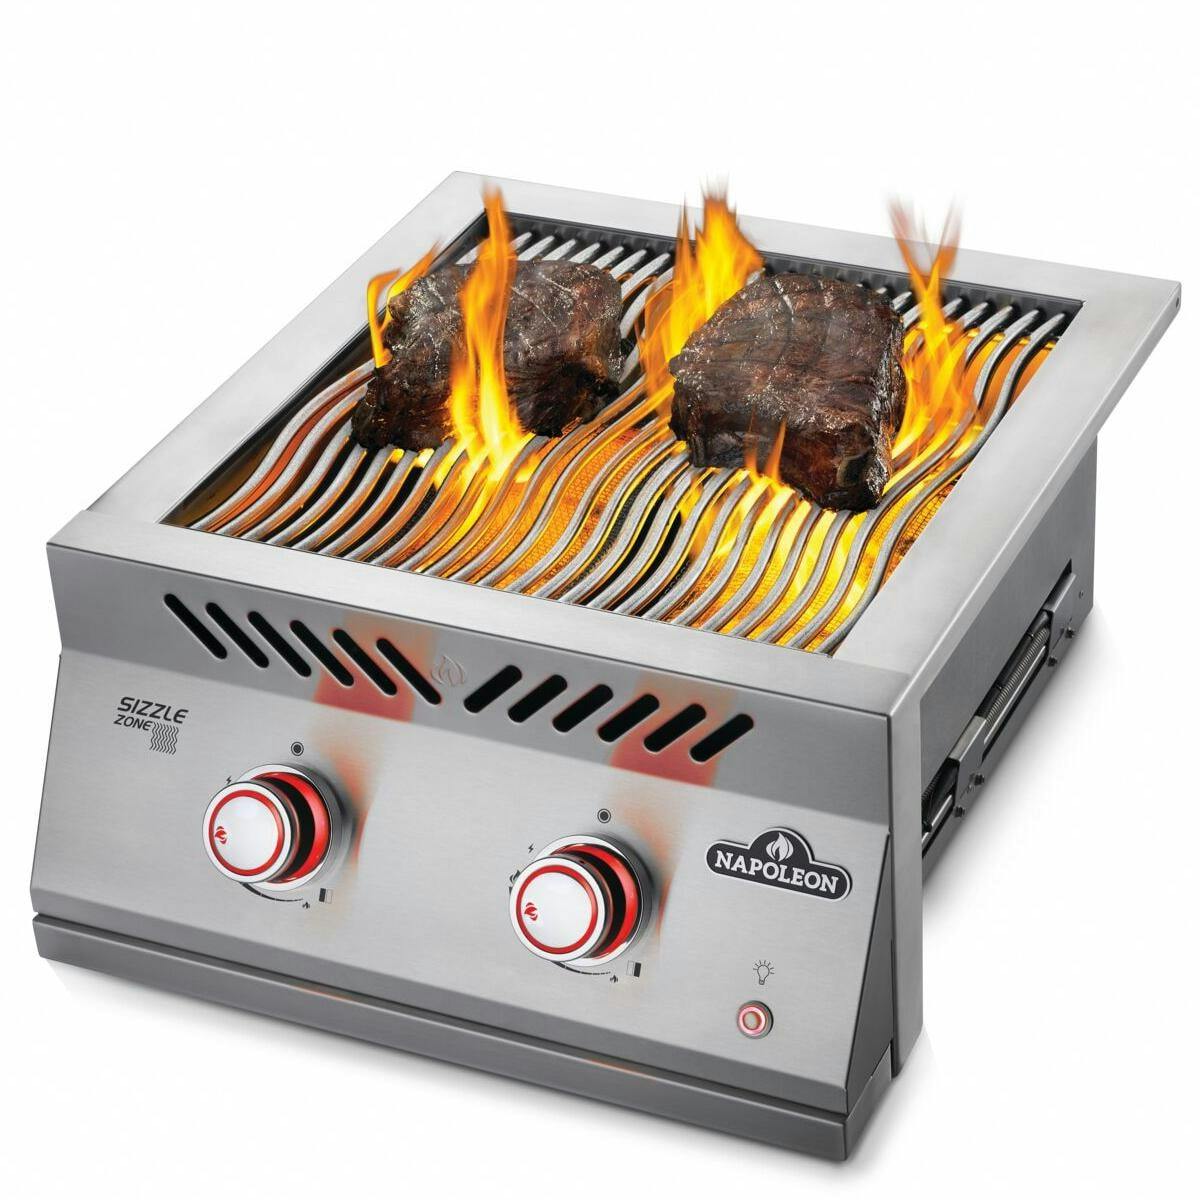 Napoleon Built-In 700 Series Propane Dual Infrared Burner with Stainless Steel Cover · 21.5 in.